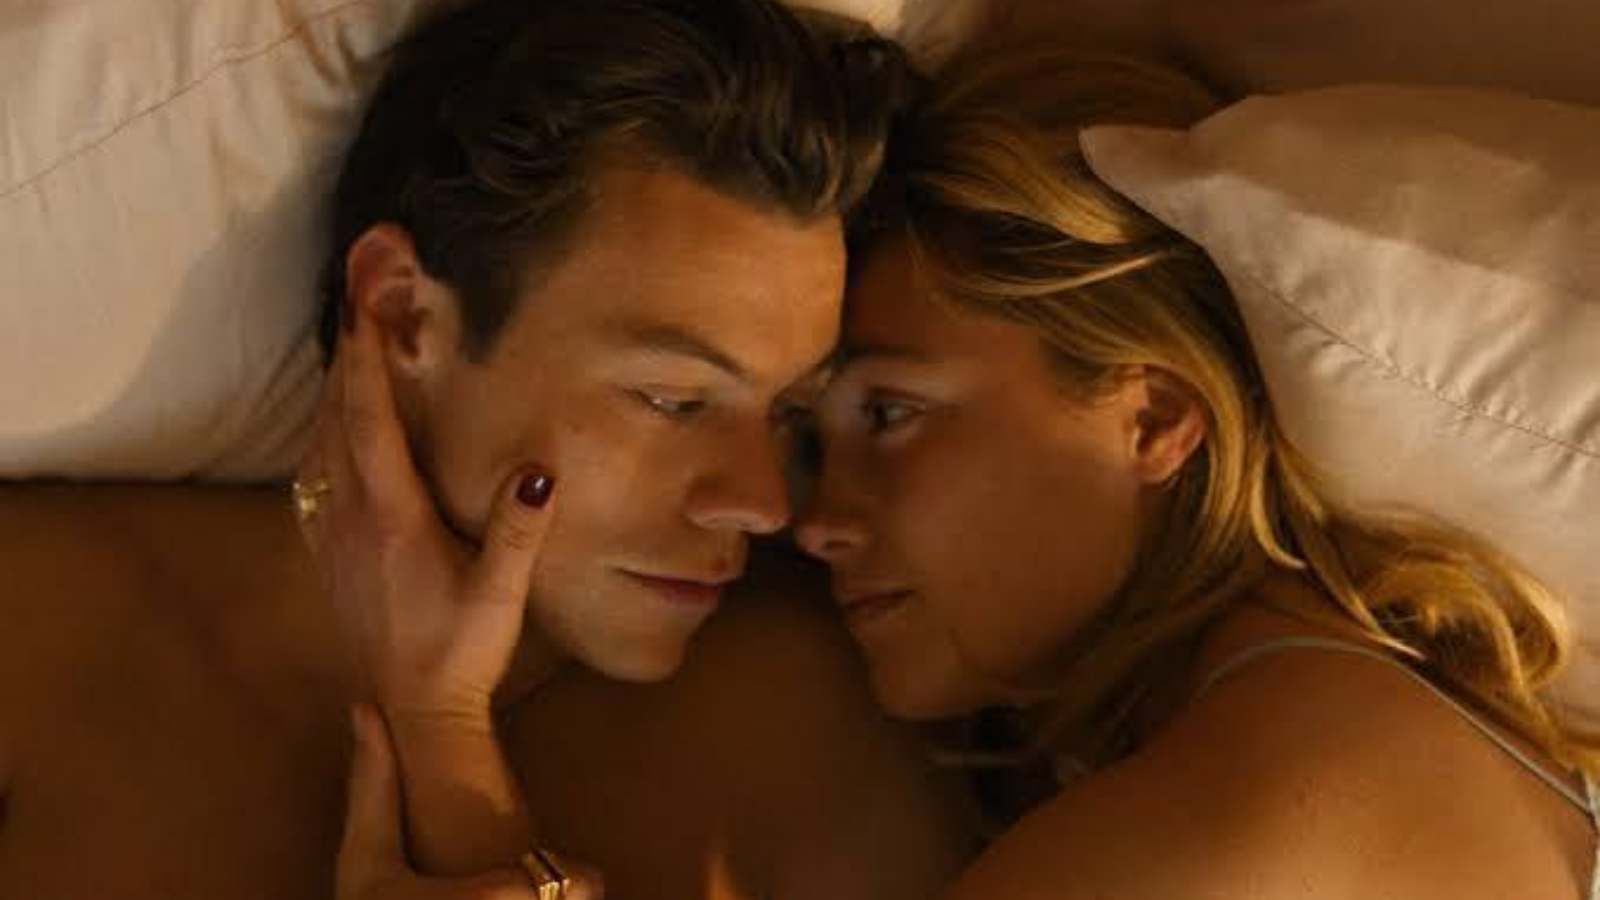 Harry Styles loved the complex character of 'Jack' in 'Don't Worry Darling'